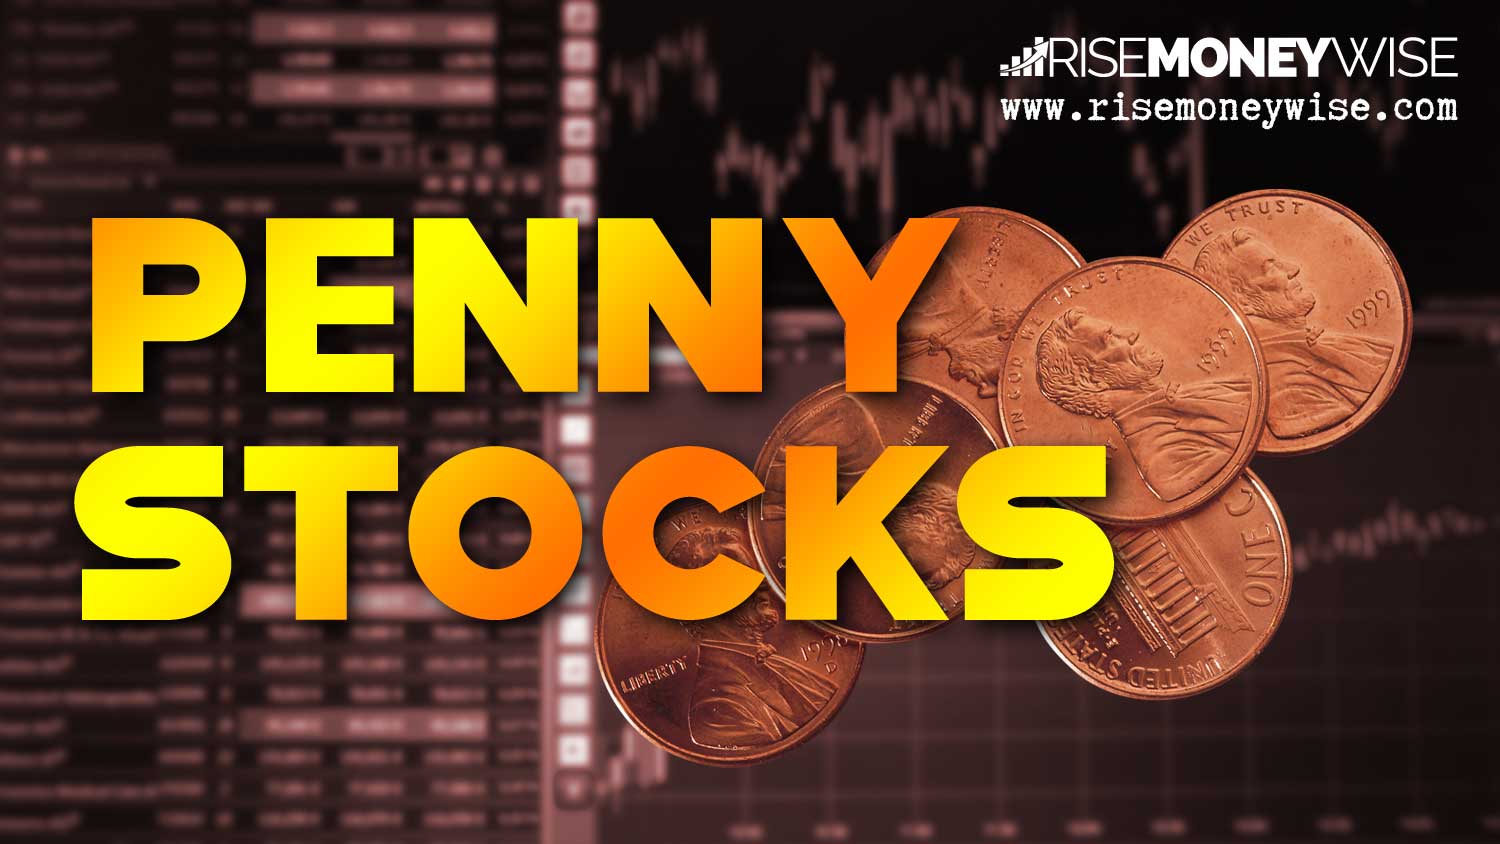 Image shows pennies representing penny stokcs